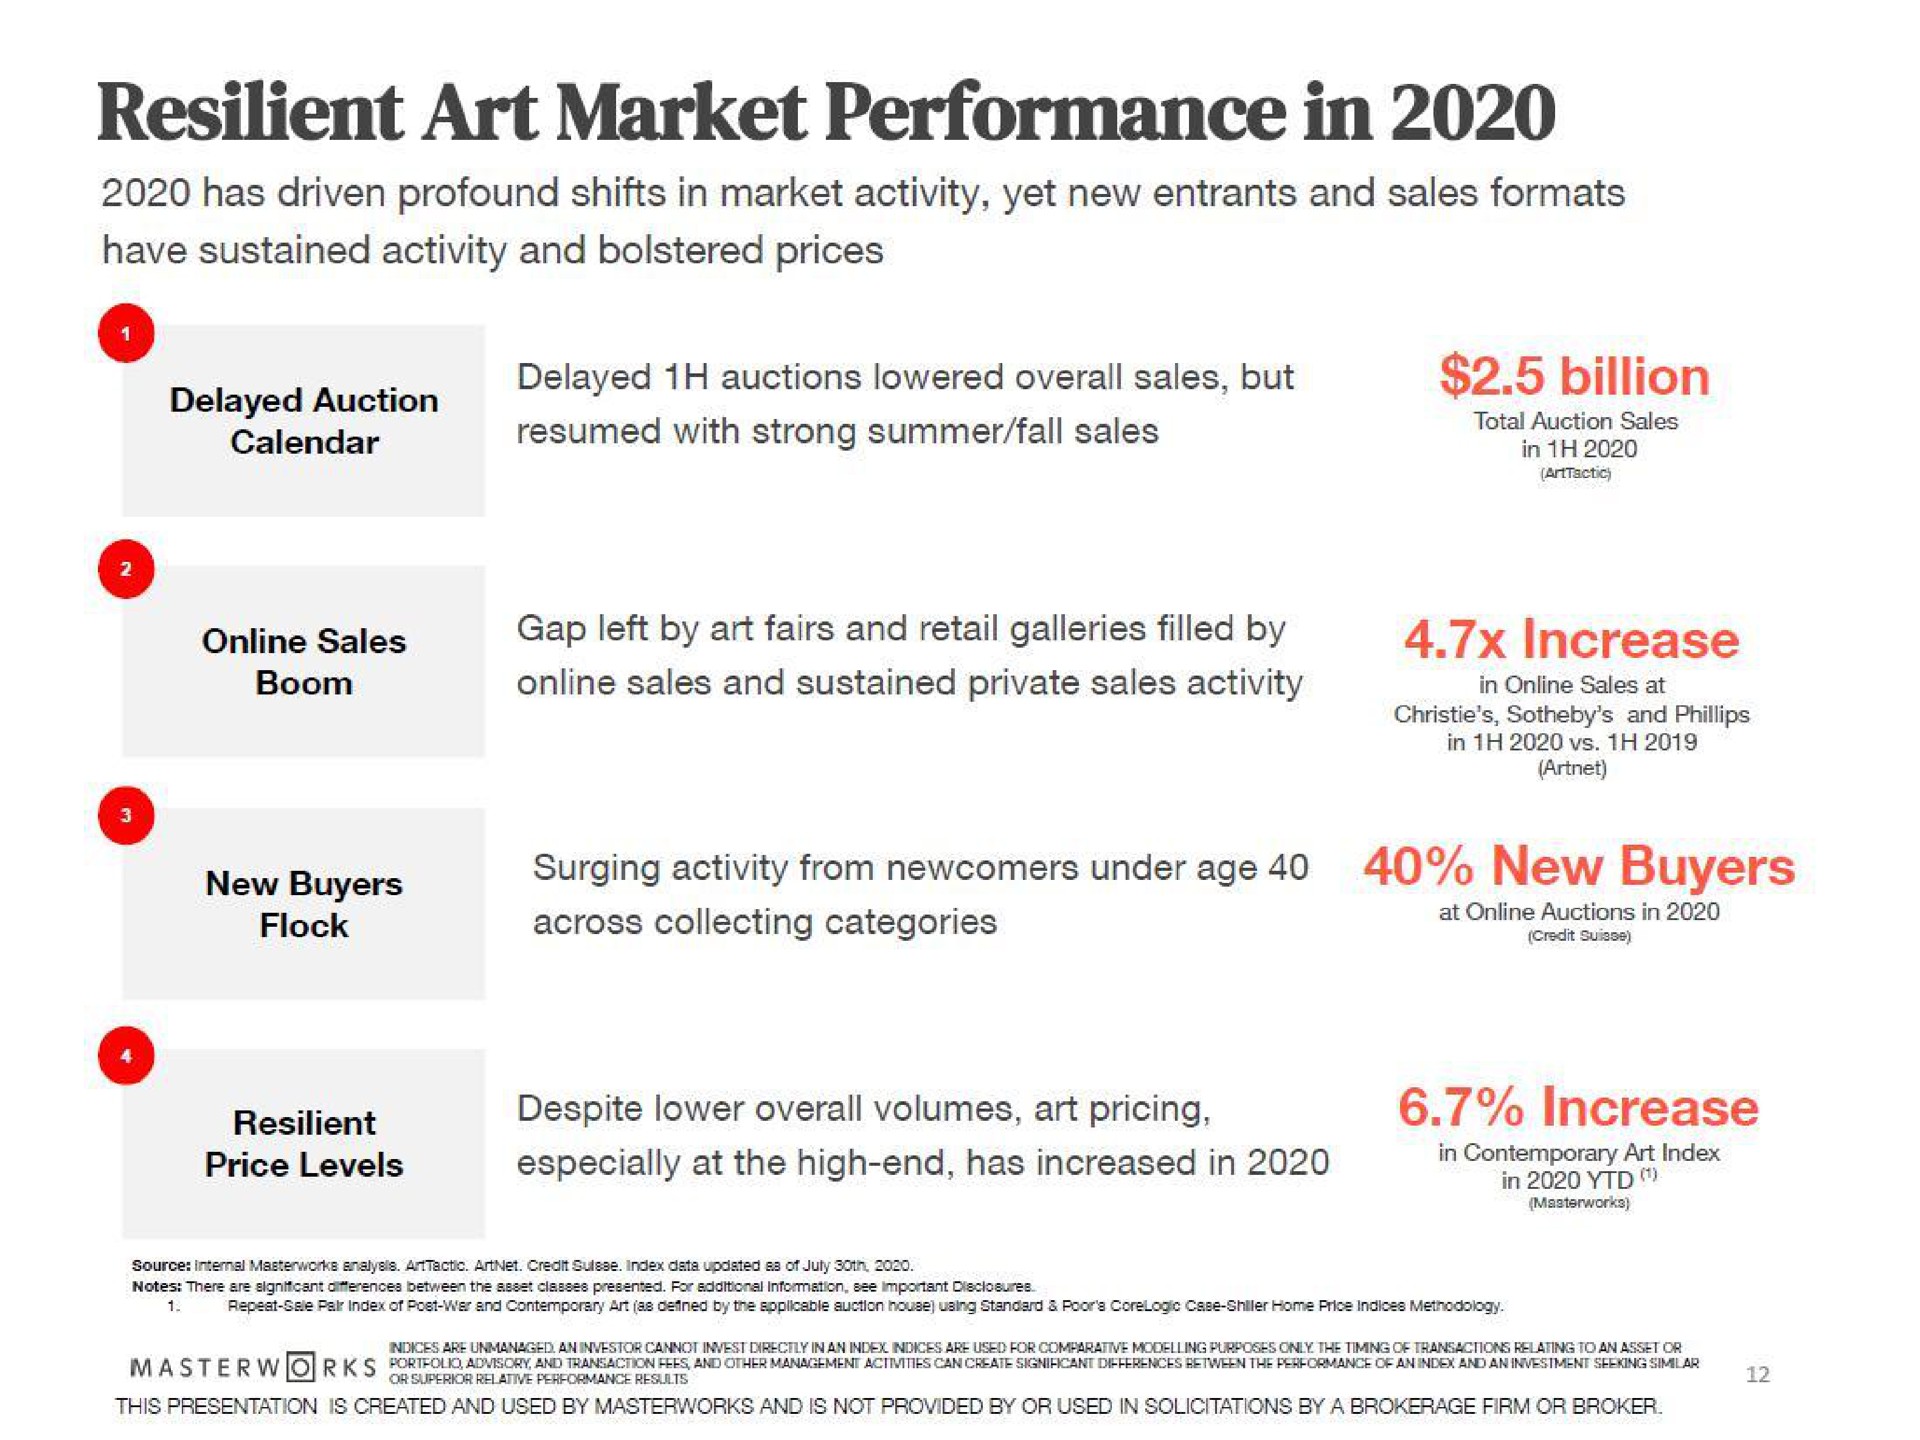 resilient art market performance in has driven profound shifts in market activity yet new entrants and sales formats have sustained activity and bolstered prices delayed auction delayed auctions lowered overall sales but resumed with strong summer fall sales a billion cor now buyers flock surging activity from newcomers underage across collecting categories new buyers price levels especially at the high end has increased in | Masterworks